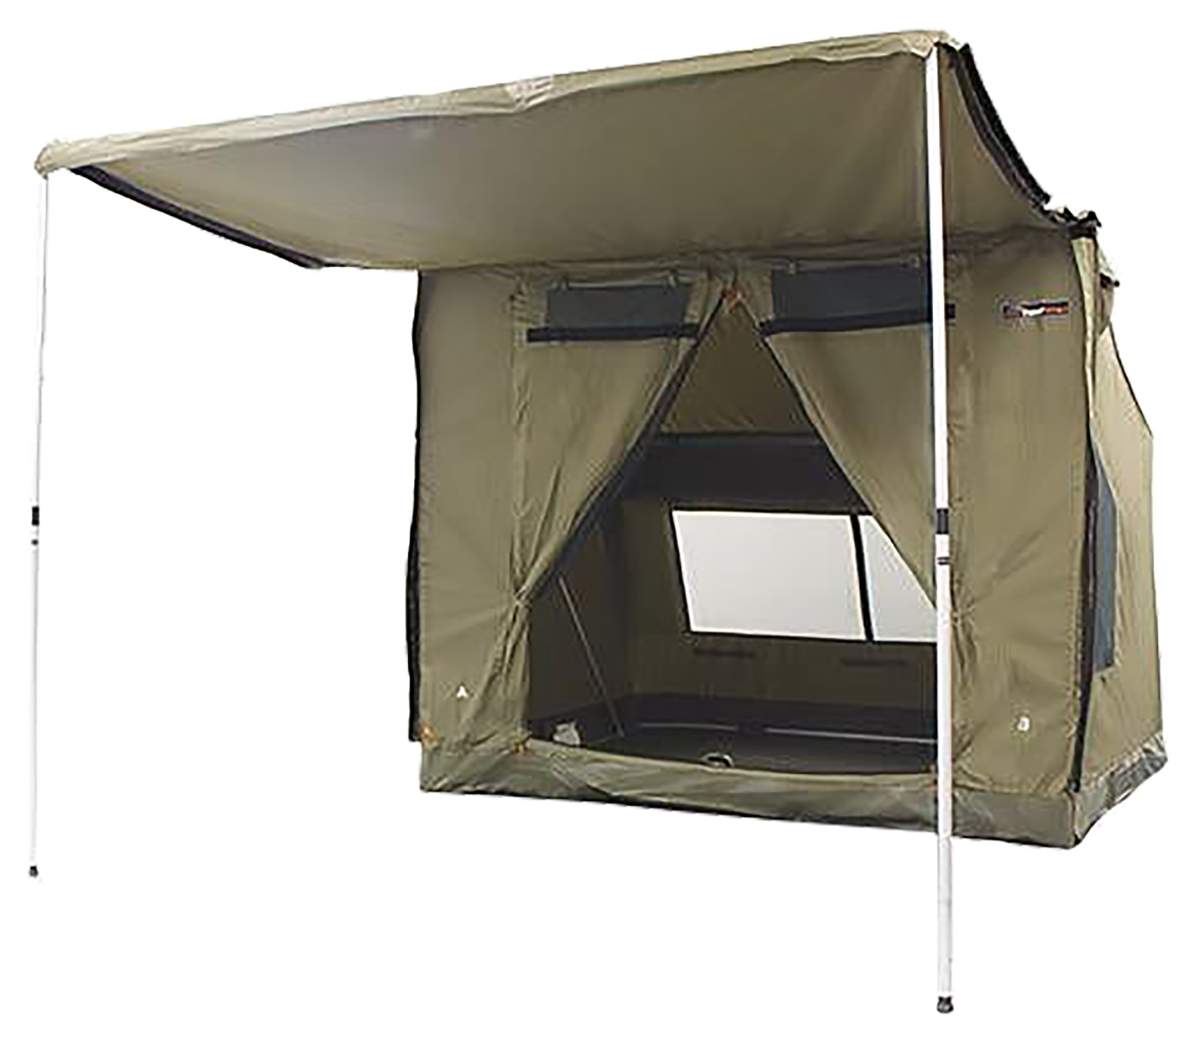 OZTENT RV-3 Thirty Second 4-Person Tent